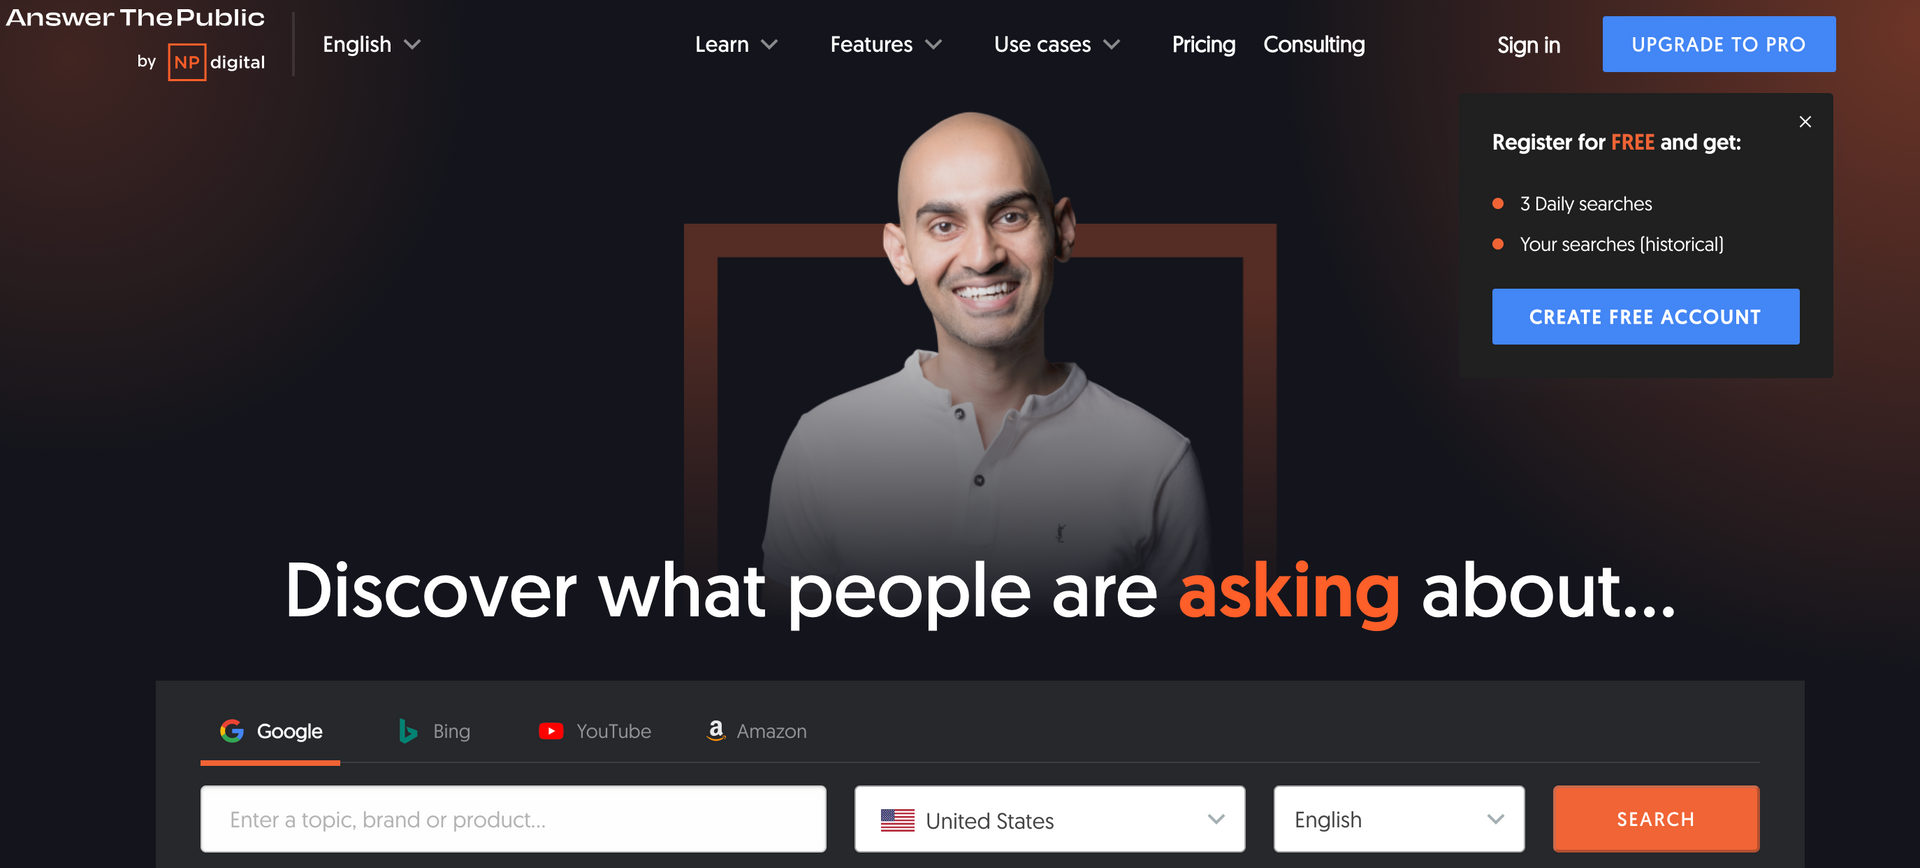 Neil Patel AnswerThePublic log in page for free SEO tools